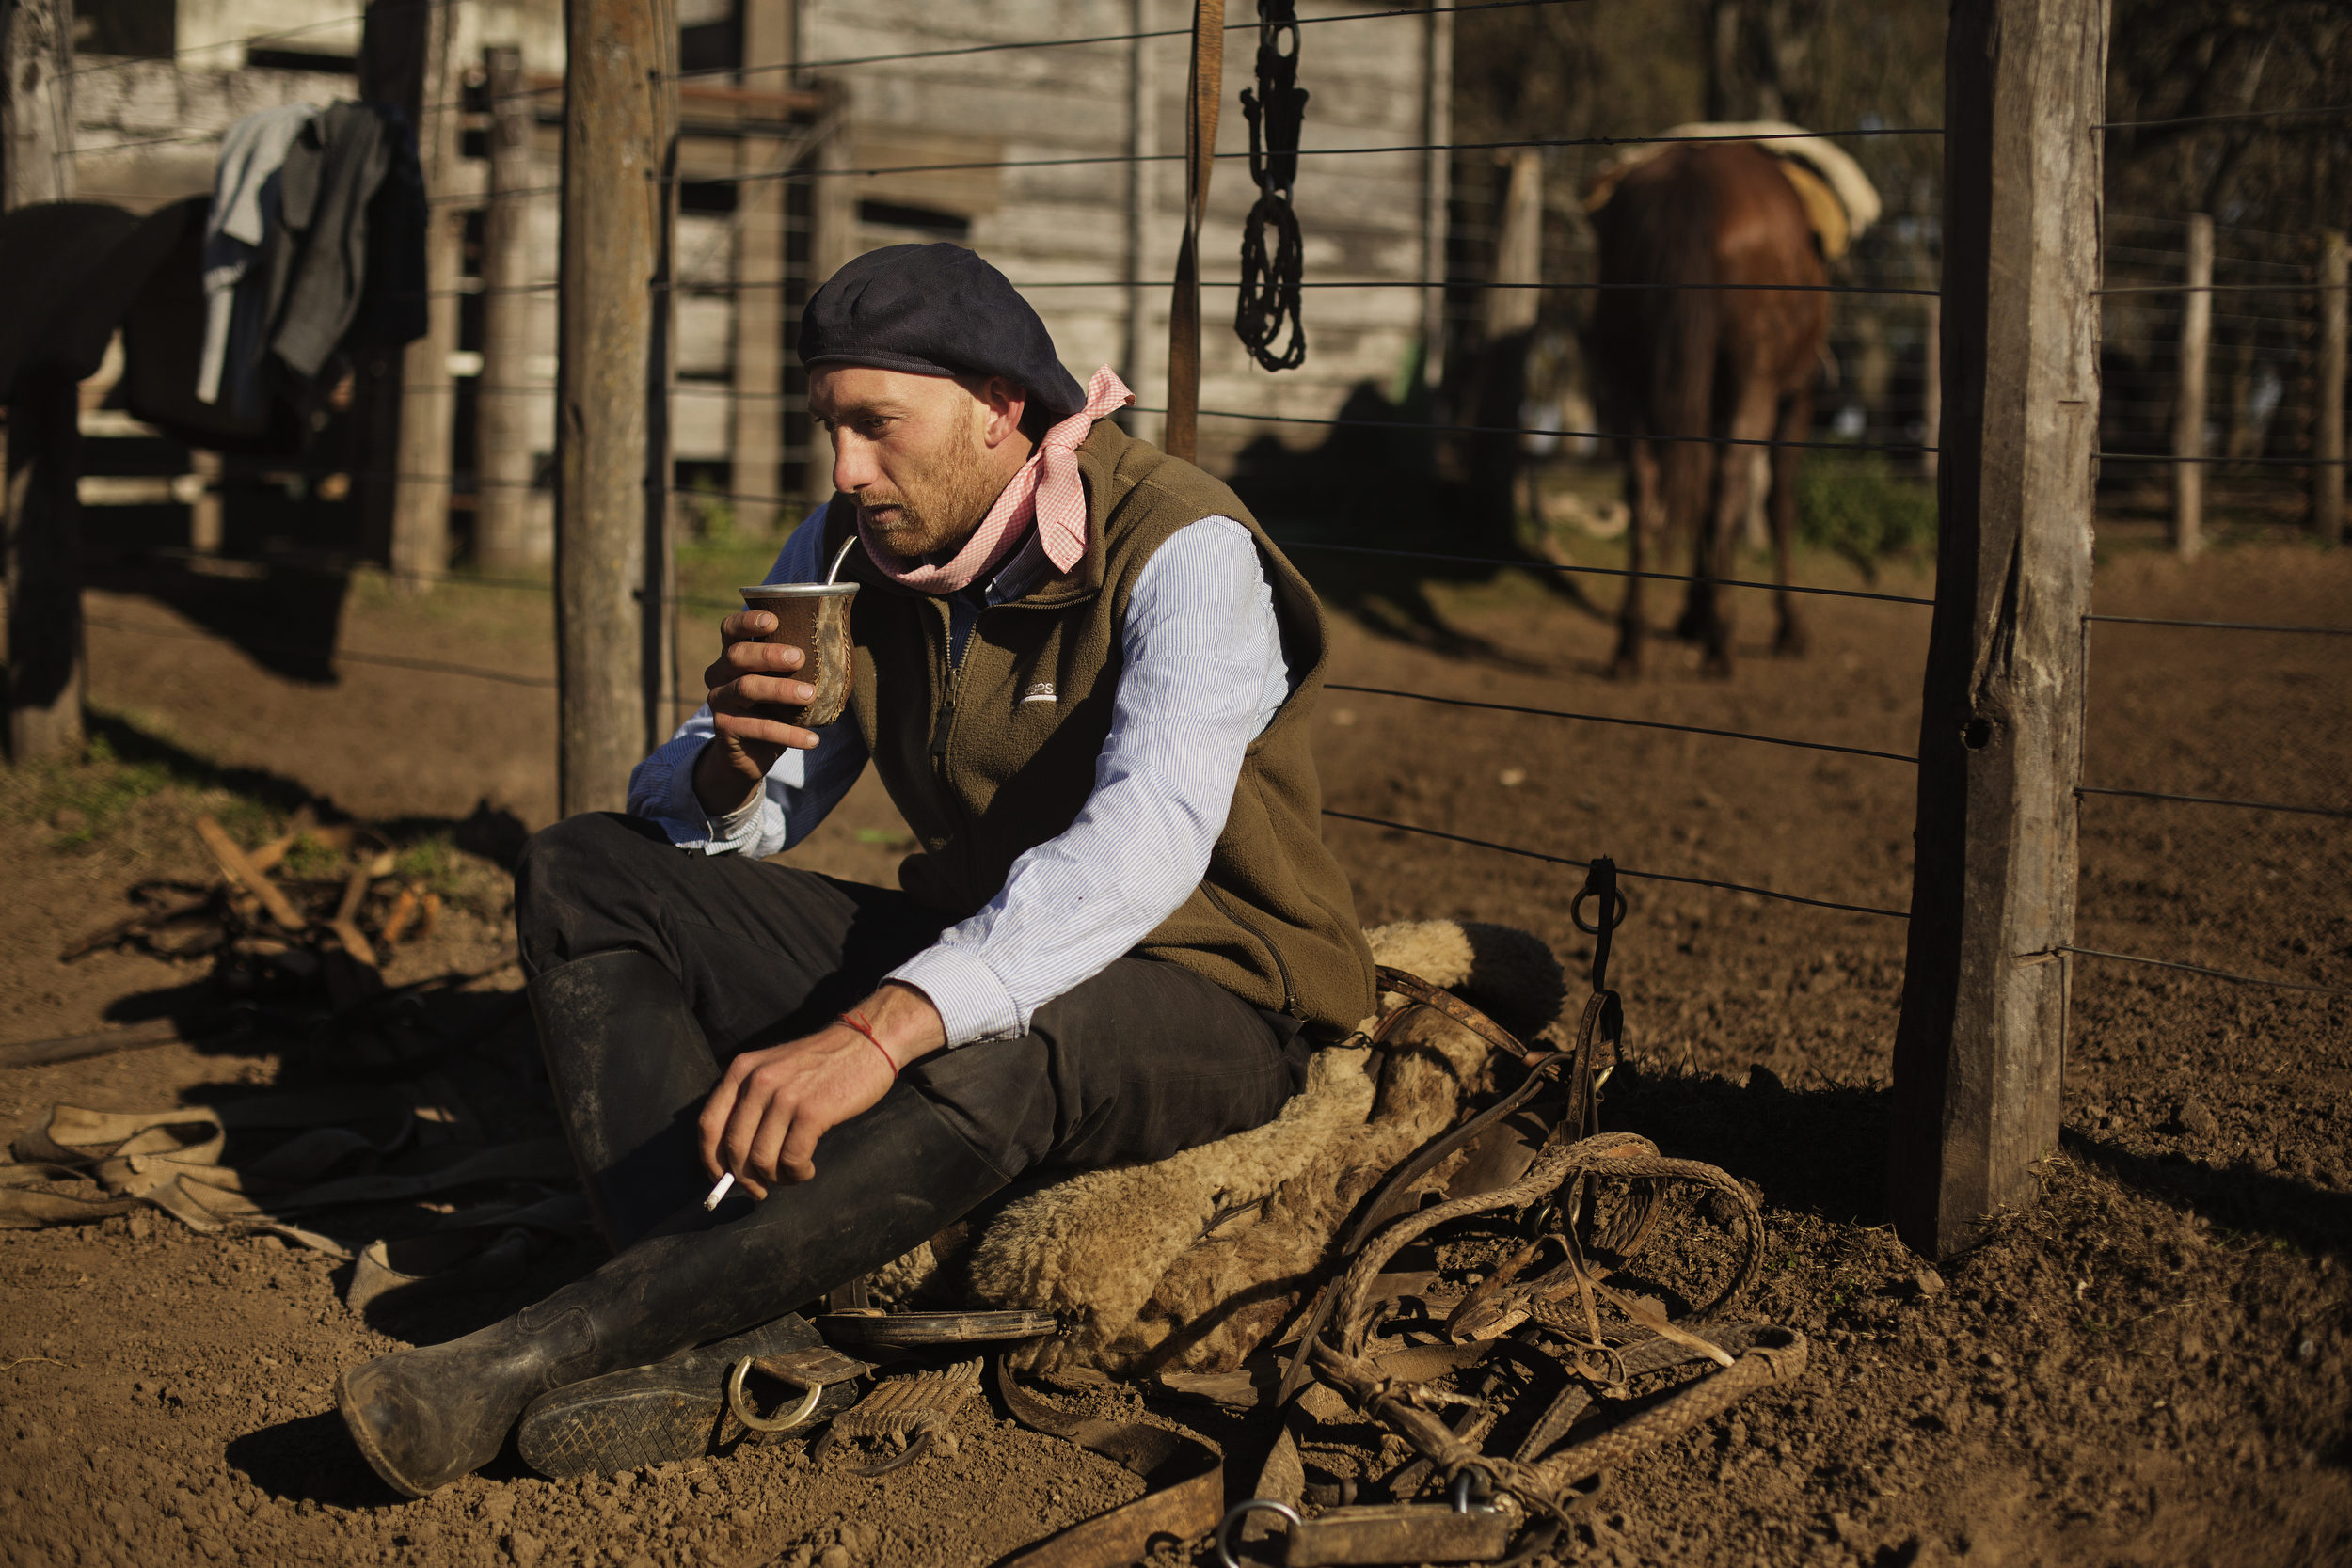  Luis takes a break from breaking horses to drink some maté. 